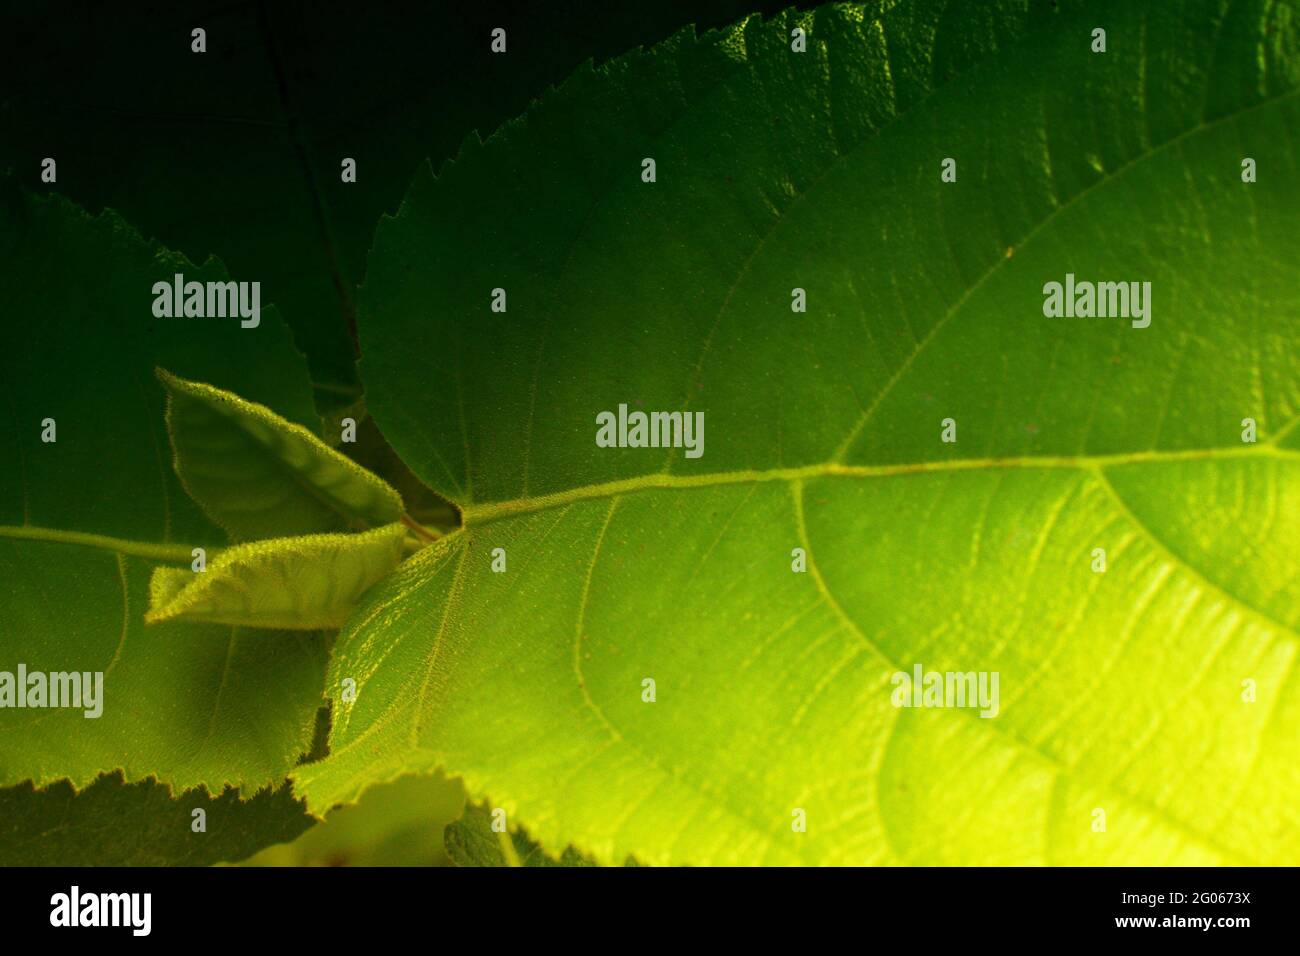 Green leaves, texture of nature, stock photograph with natural background Stock Photo